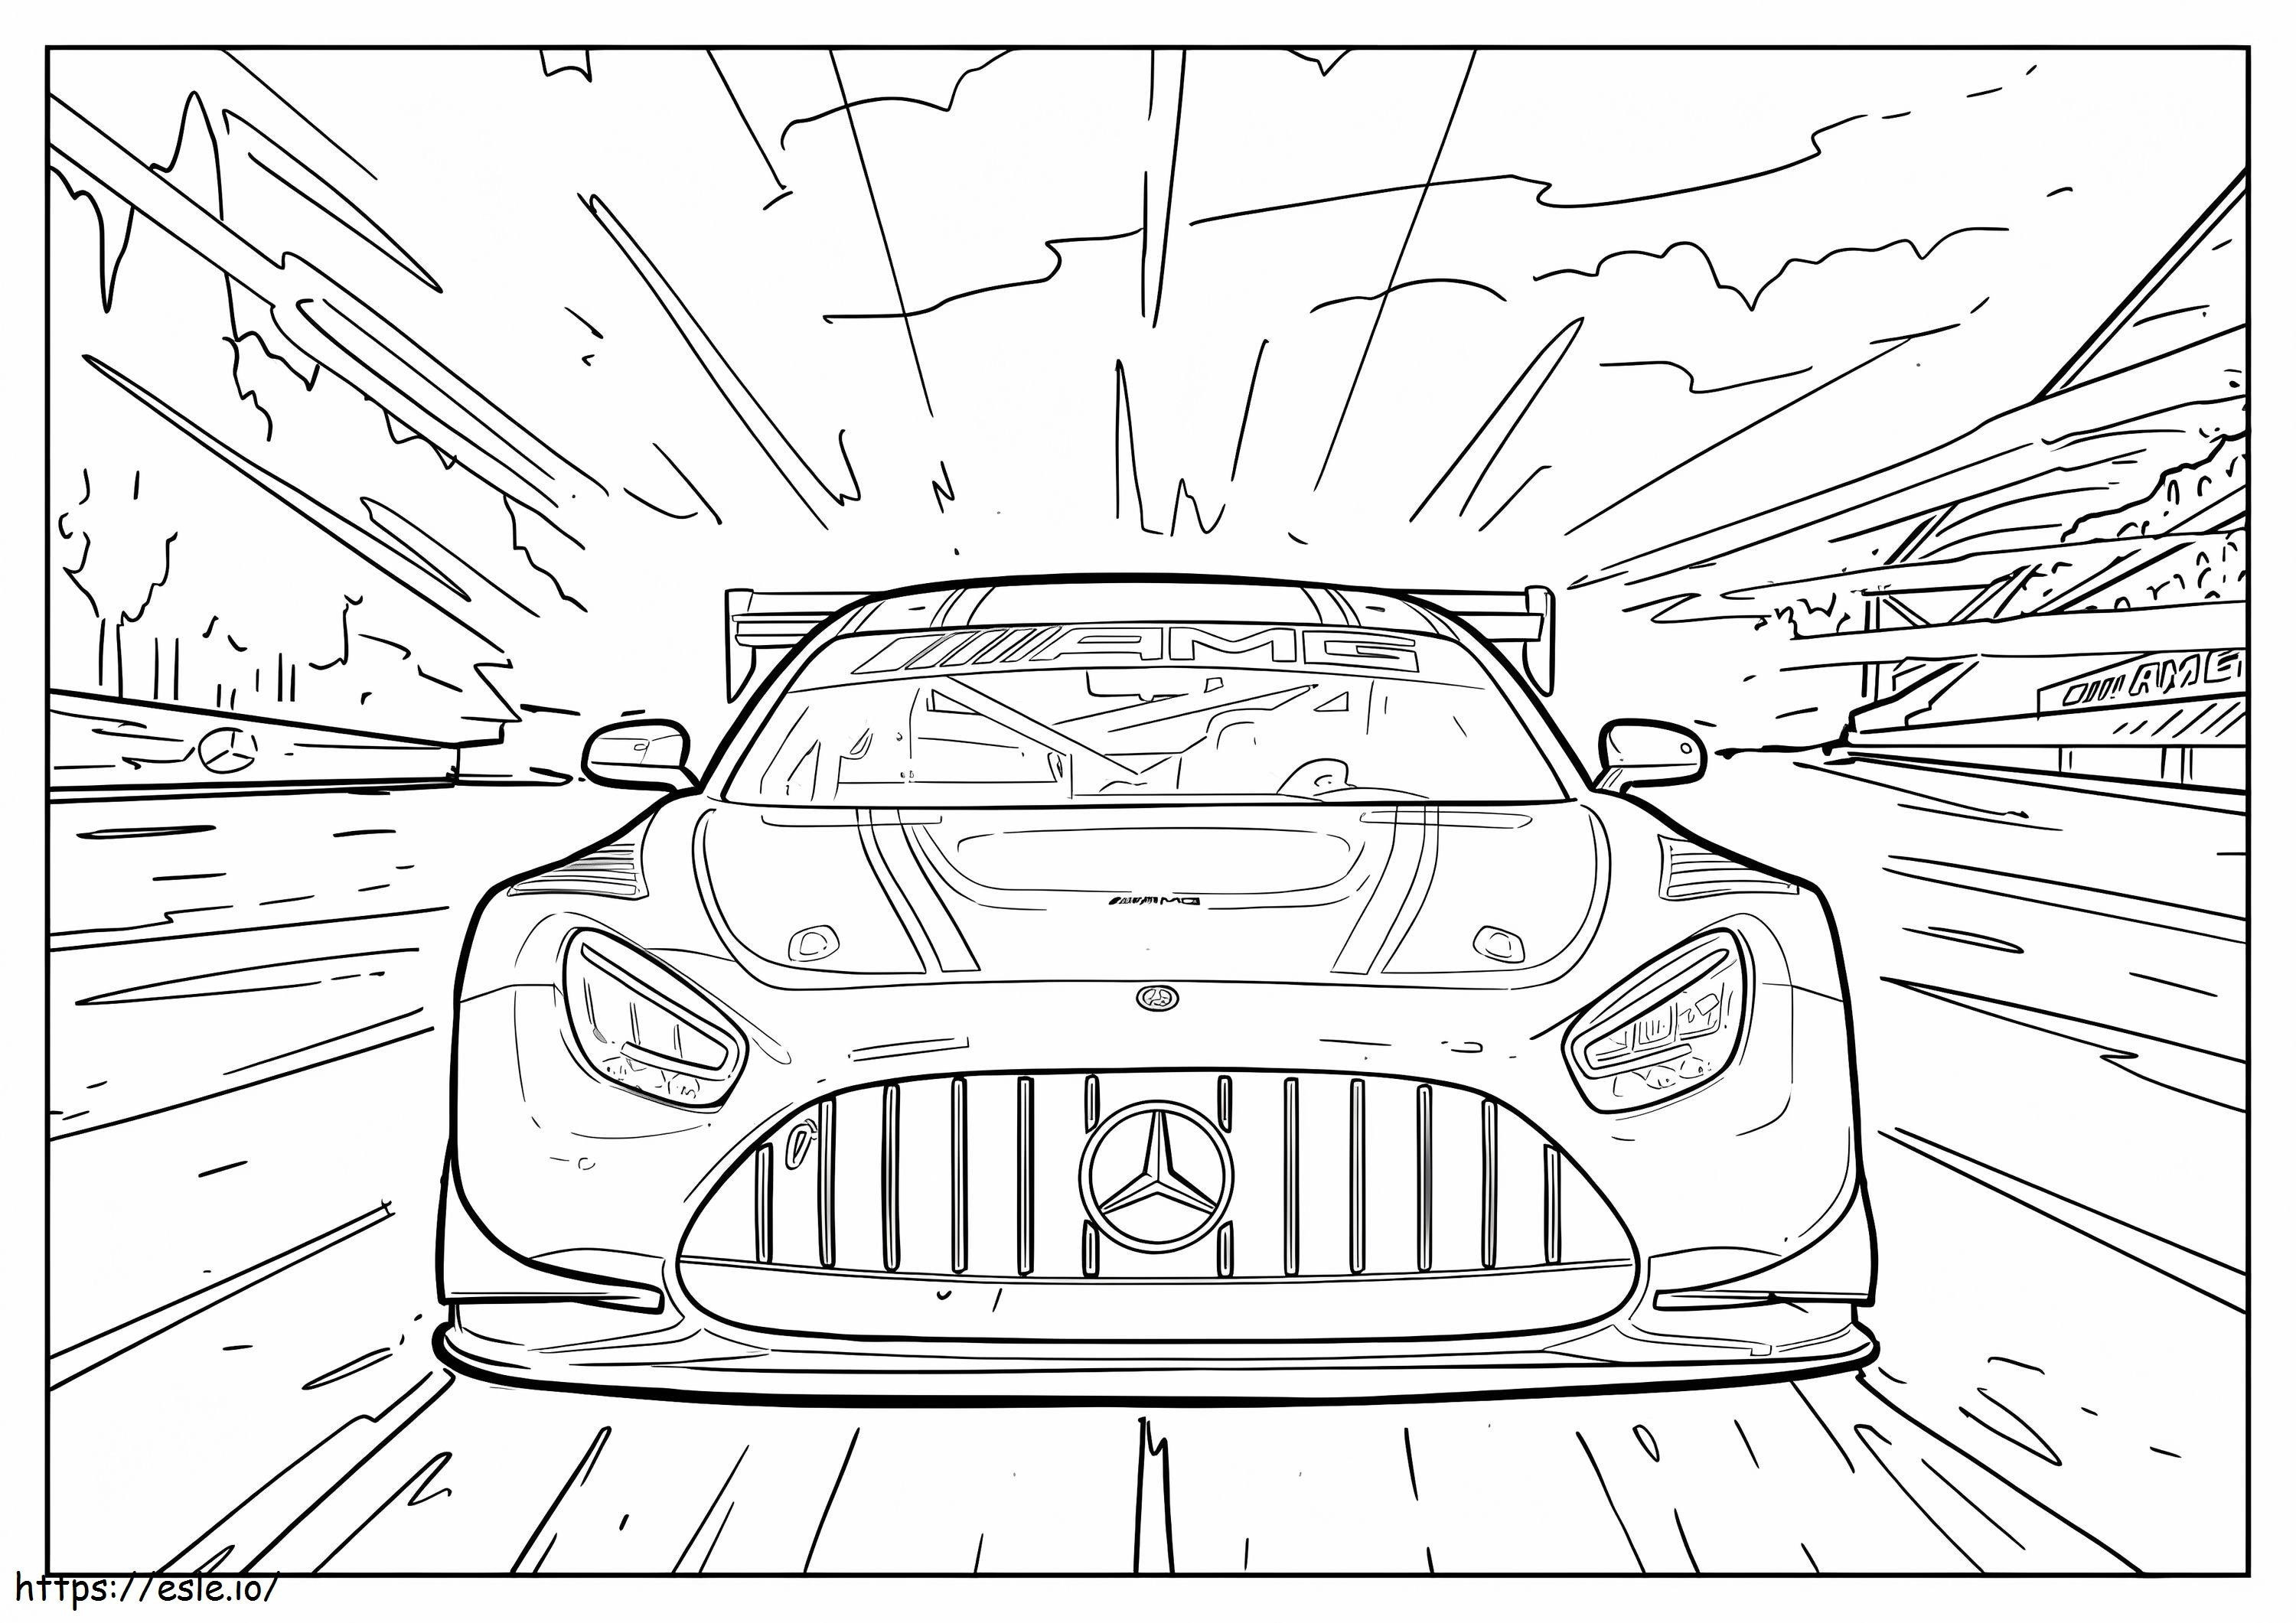 Mercedes Benz 1 Sports Car coloring page